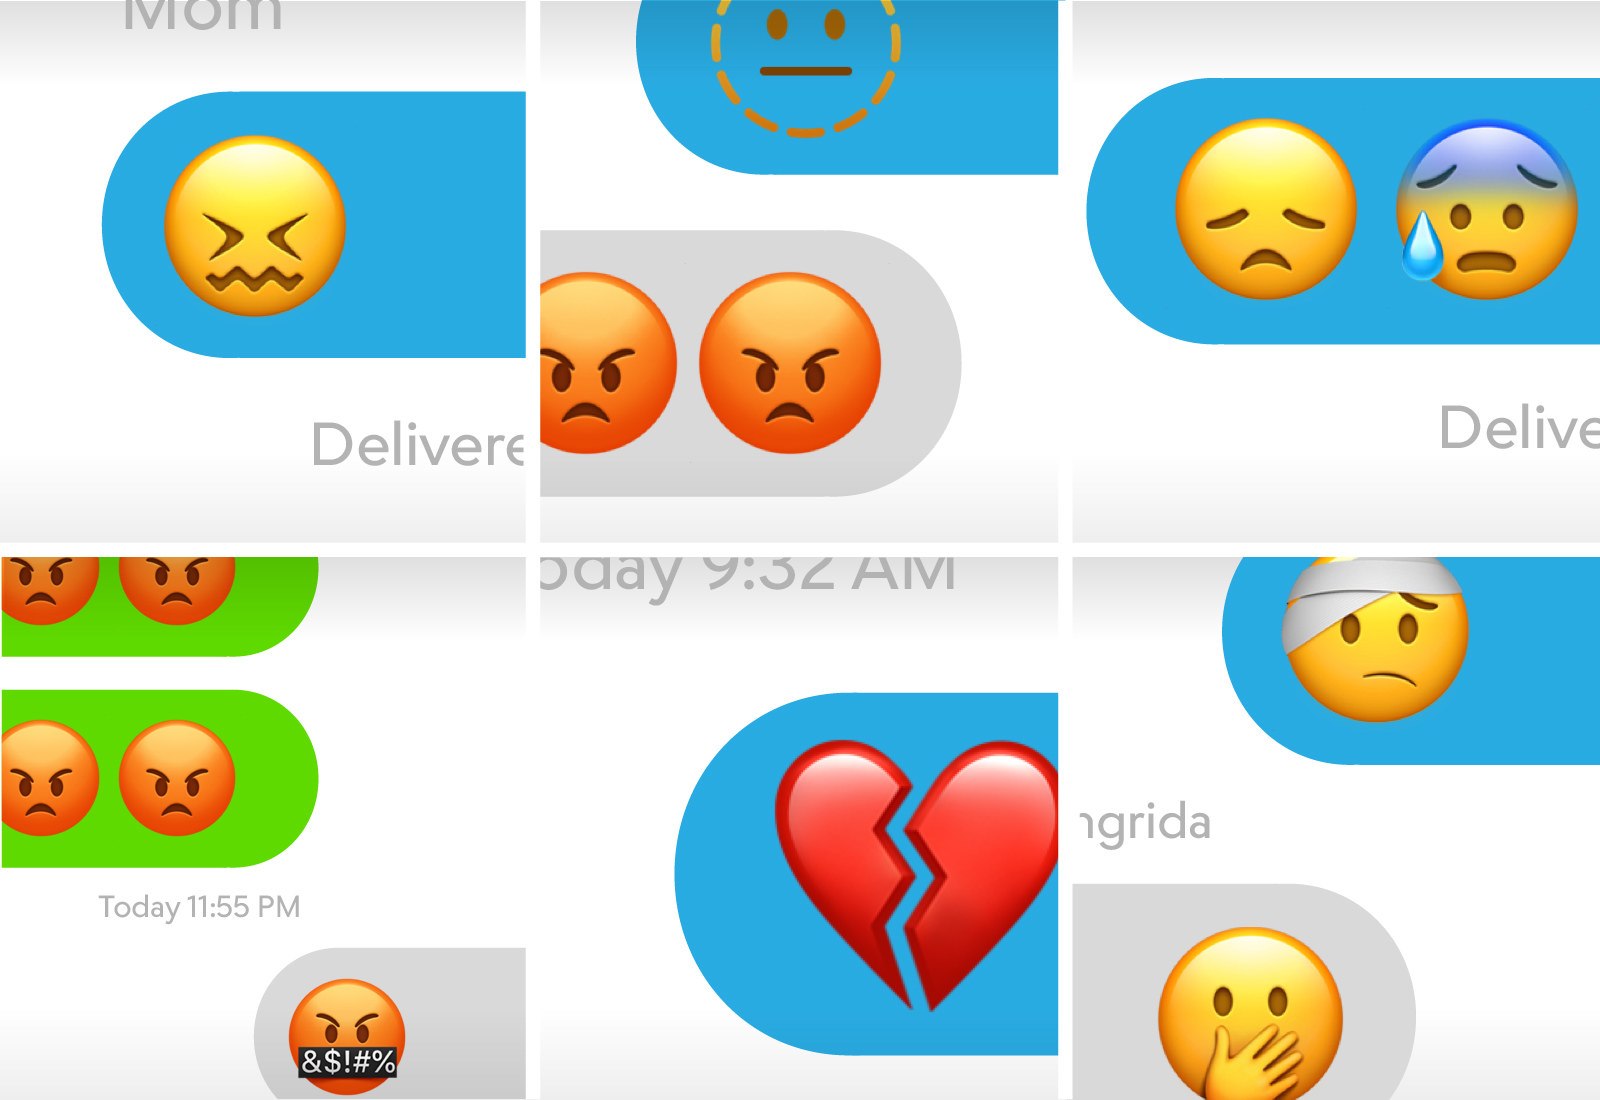 Art showing text messages with emojis representing a range of emotions: anger, sadness, heartbroken